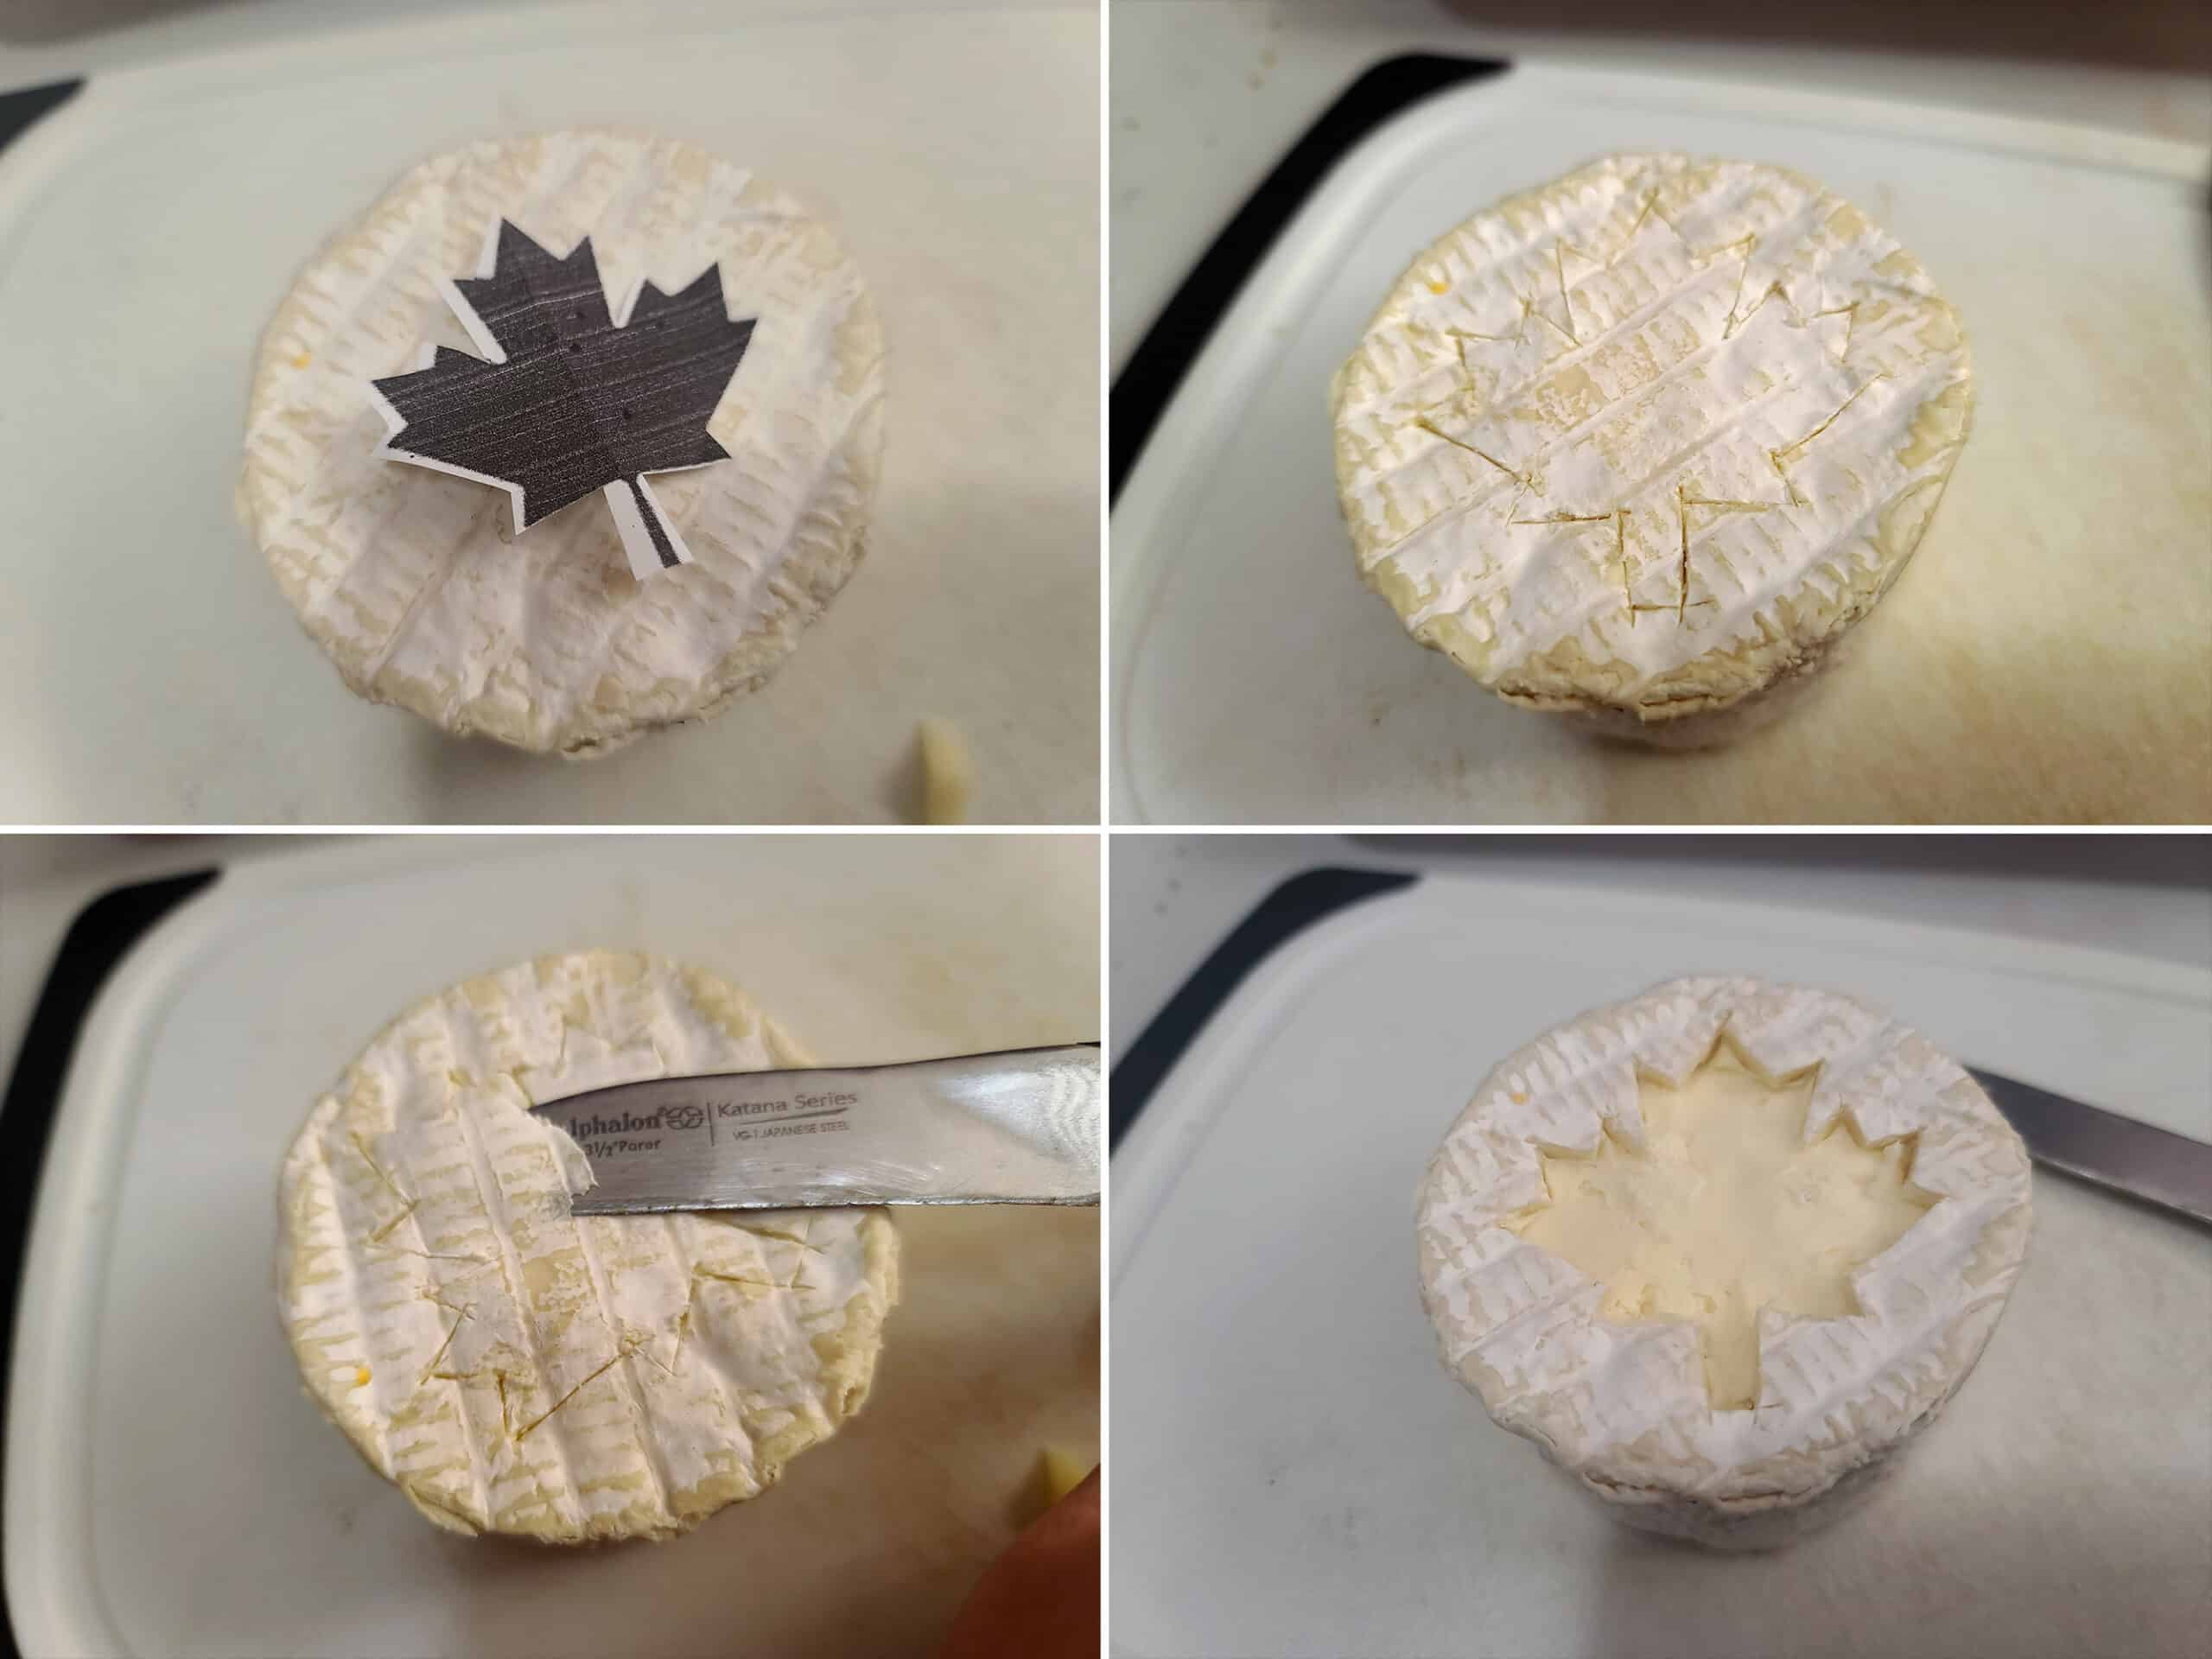 4 part image showing a small maple leaf being cut out of the rind of a mini brie cheese.